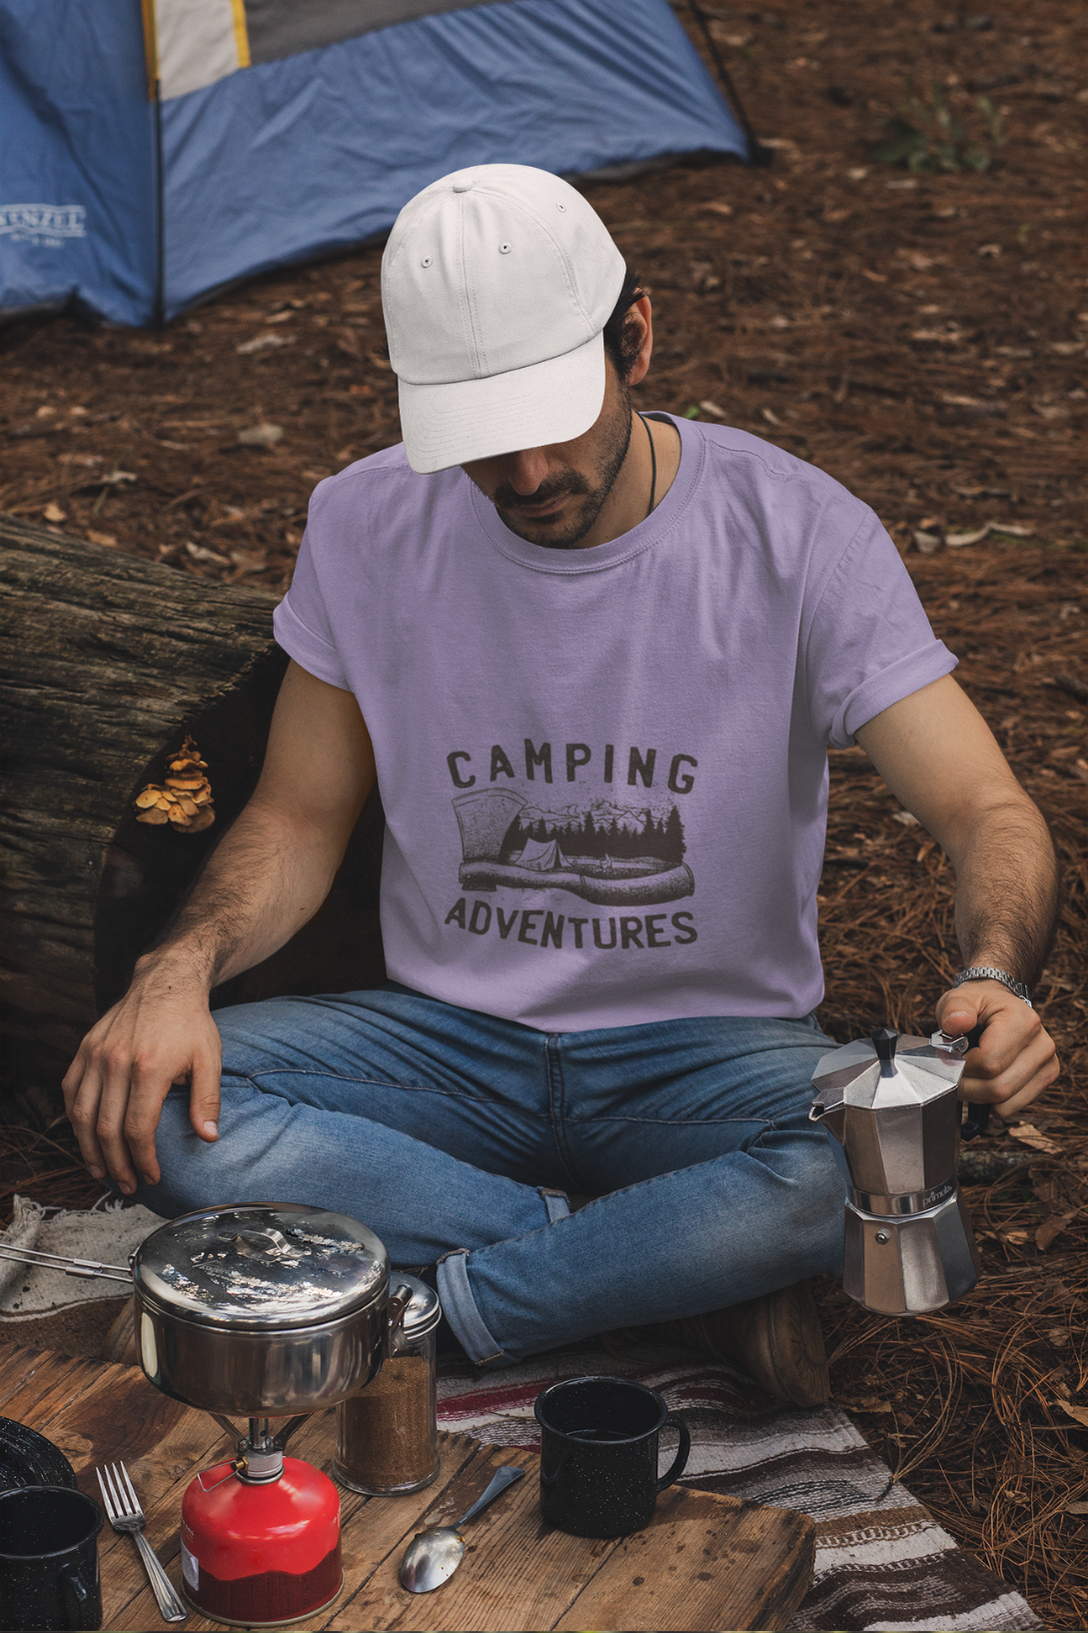 Camping Adventures Printed T-Shirt For Men - WowWaves - 4